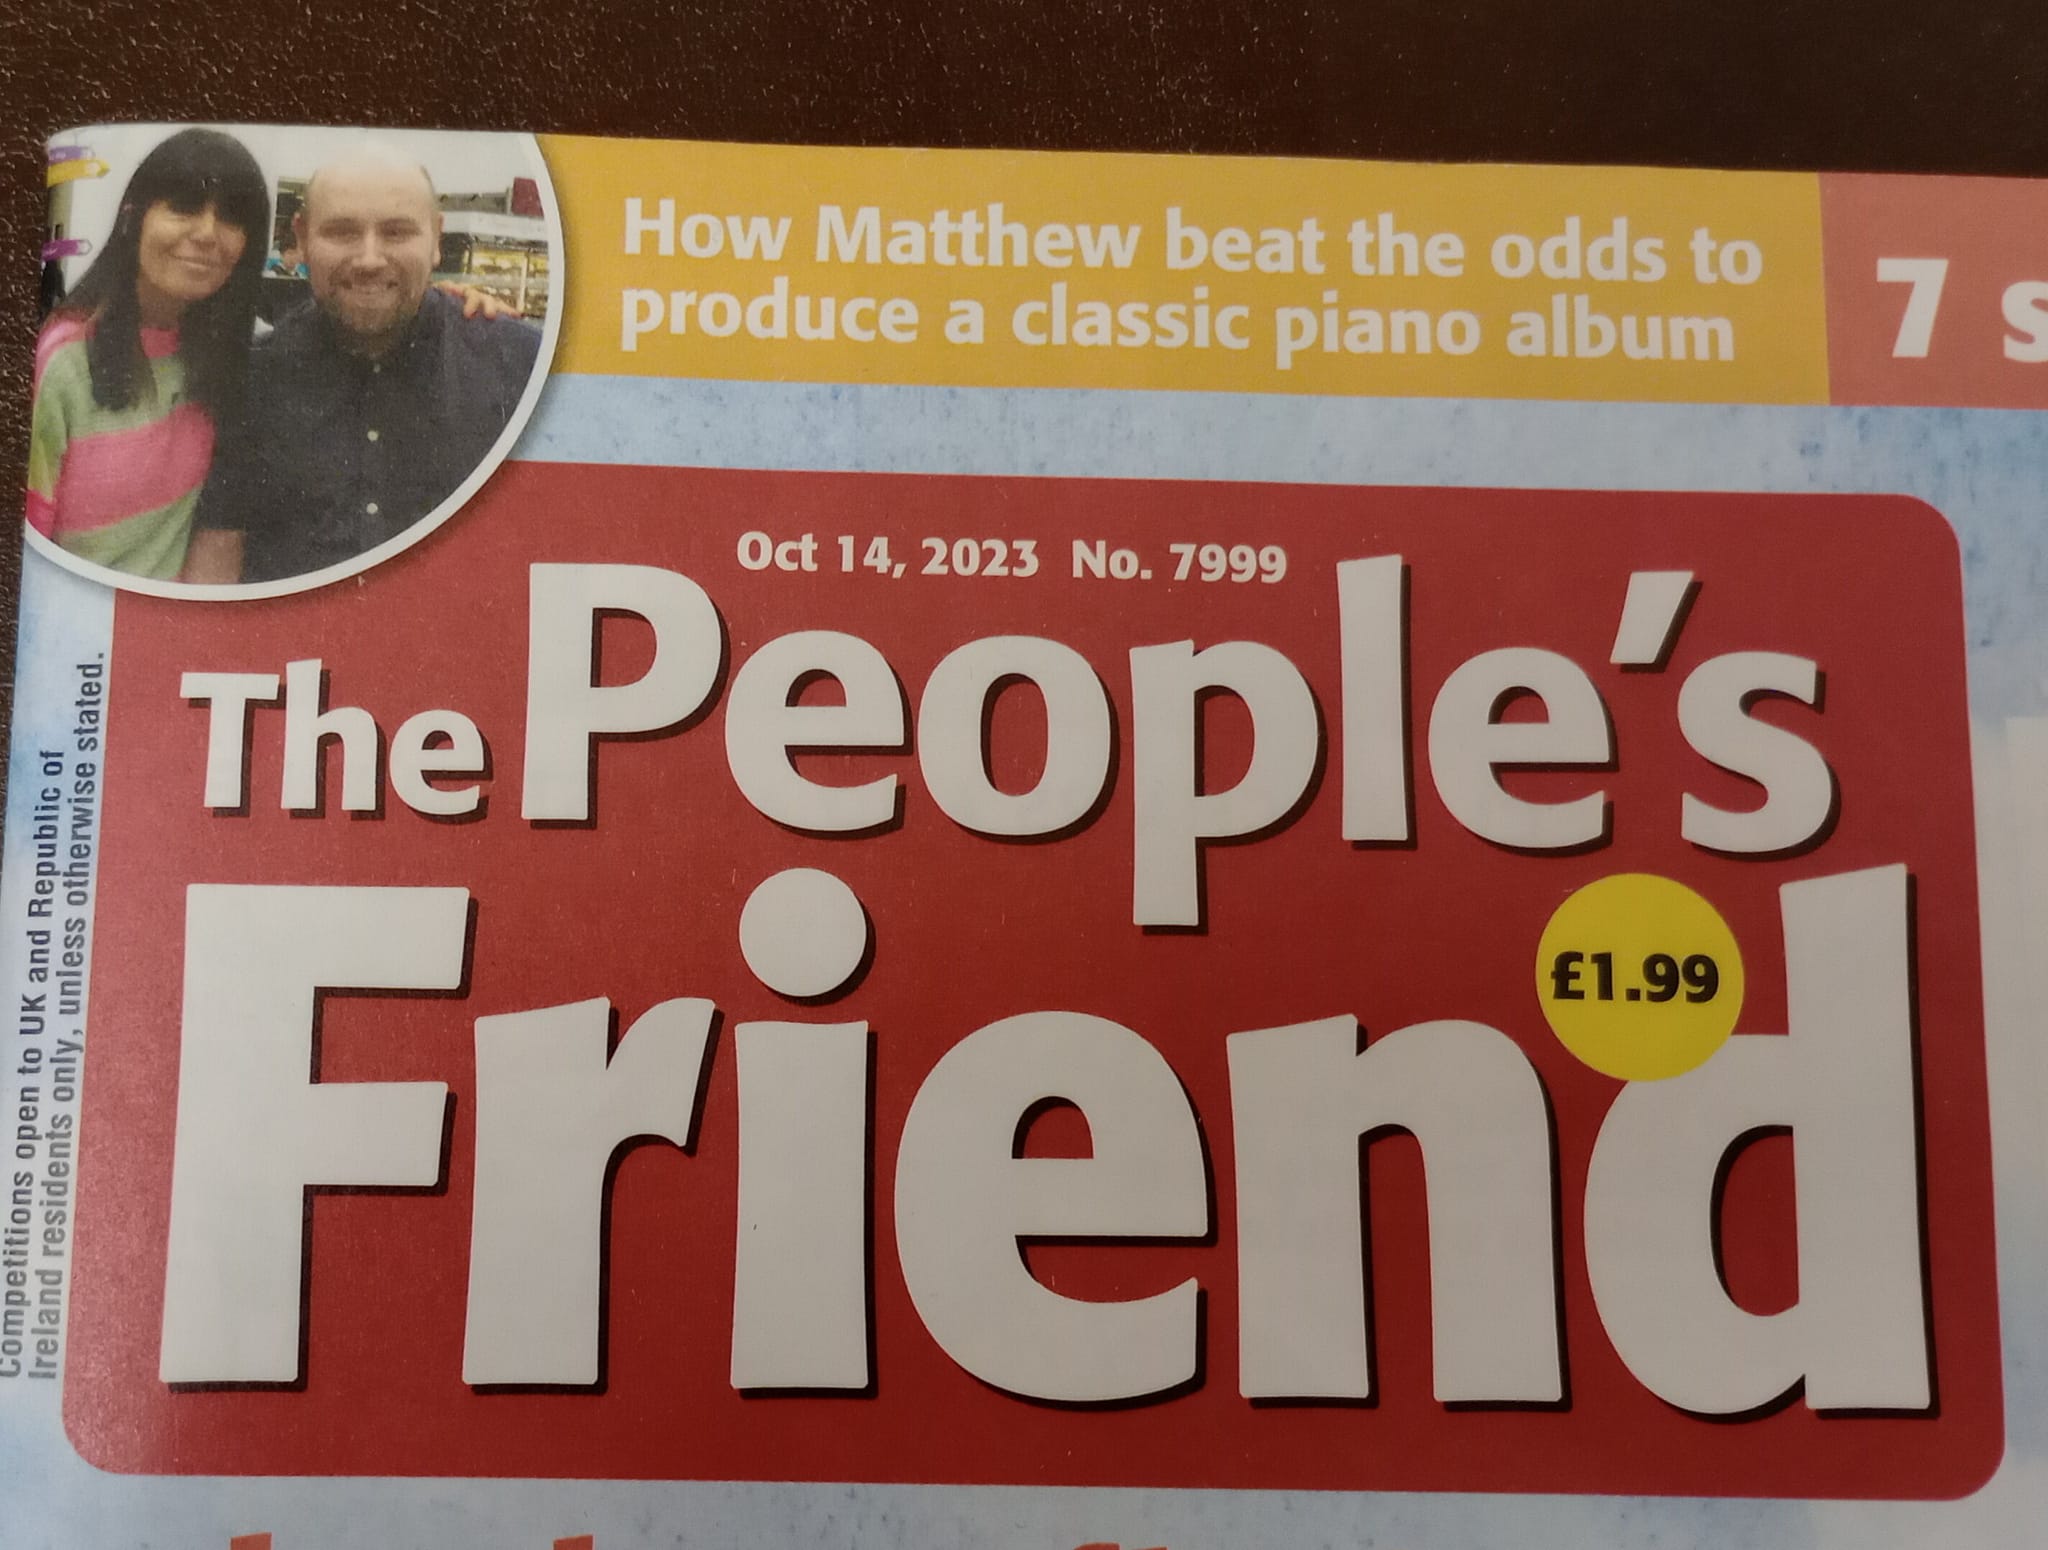 The People's Friend Magazine - "How Matthew beat the odds to produce a classic piano album October 14th 2023 